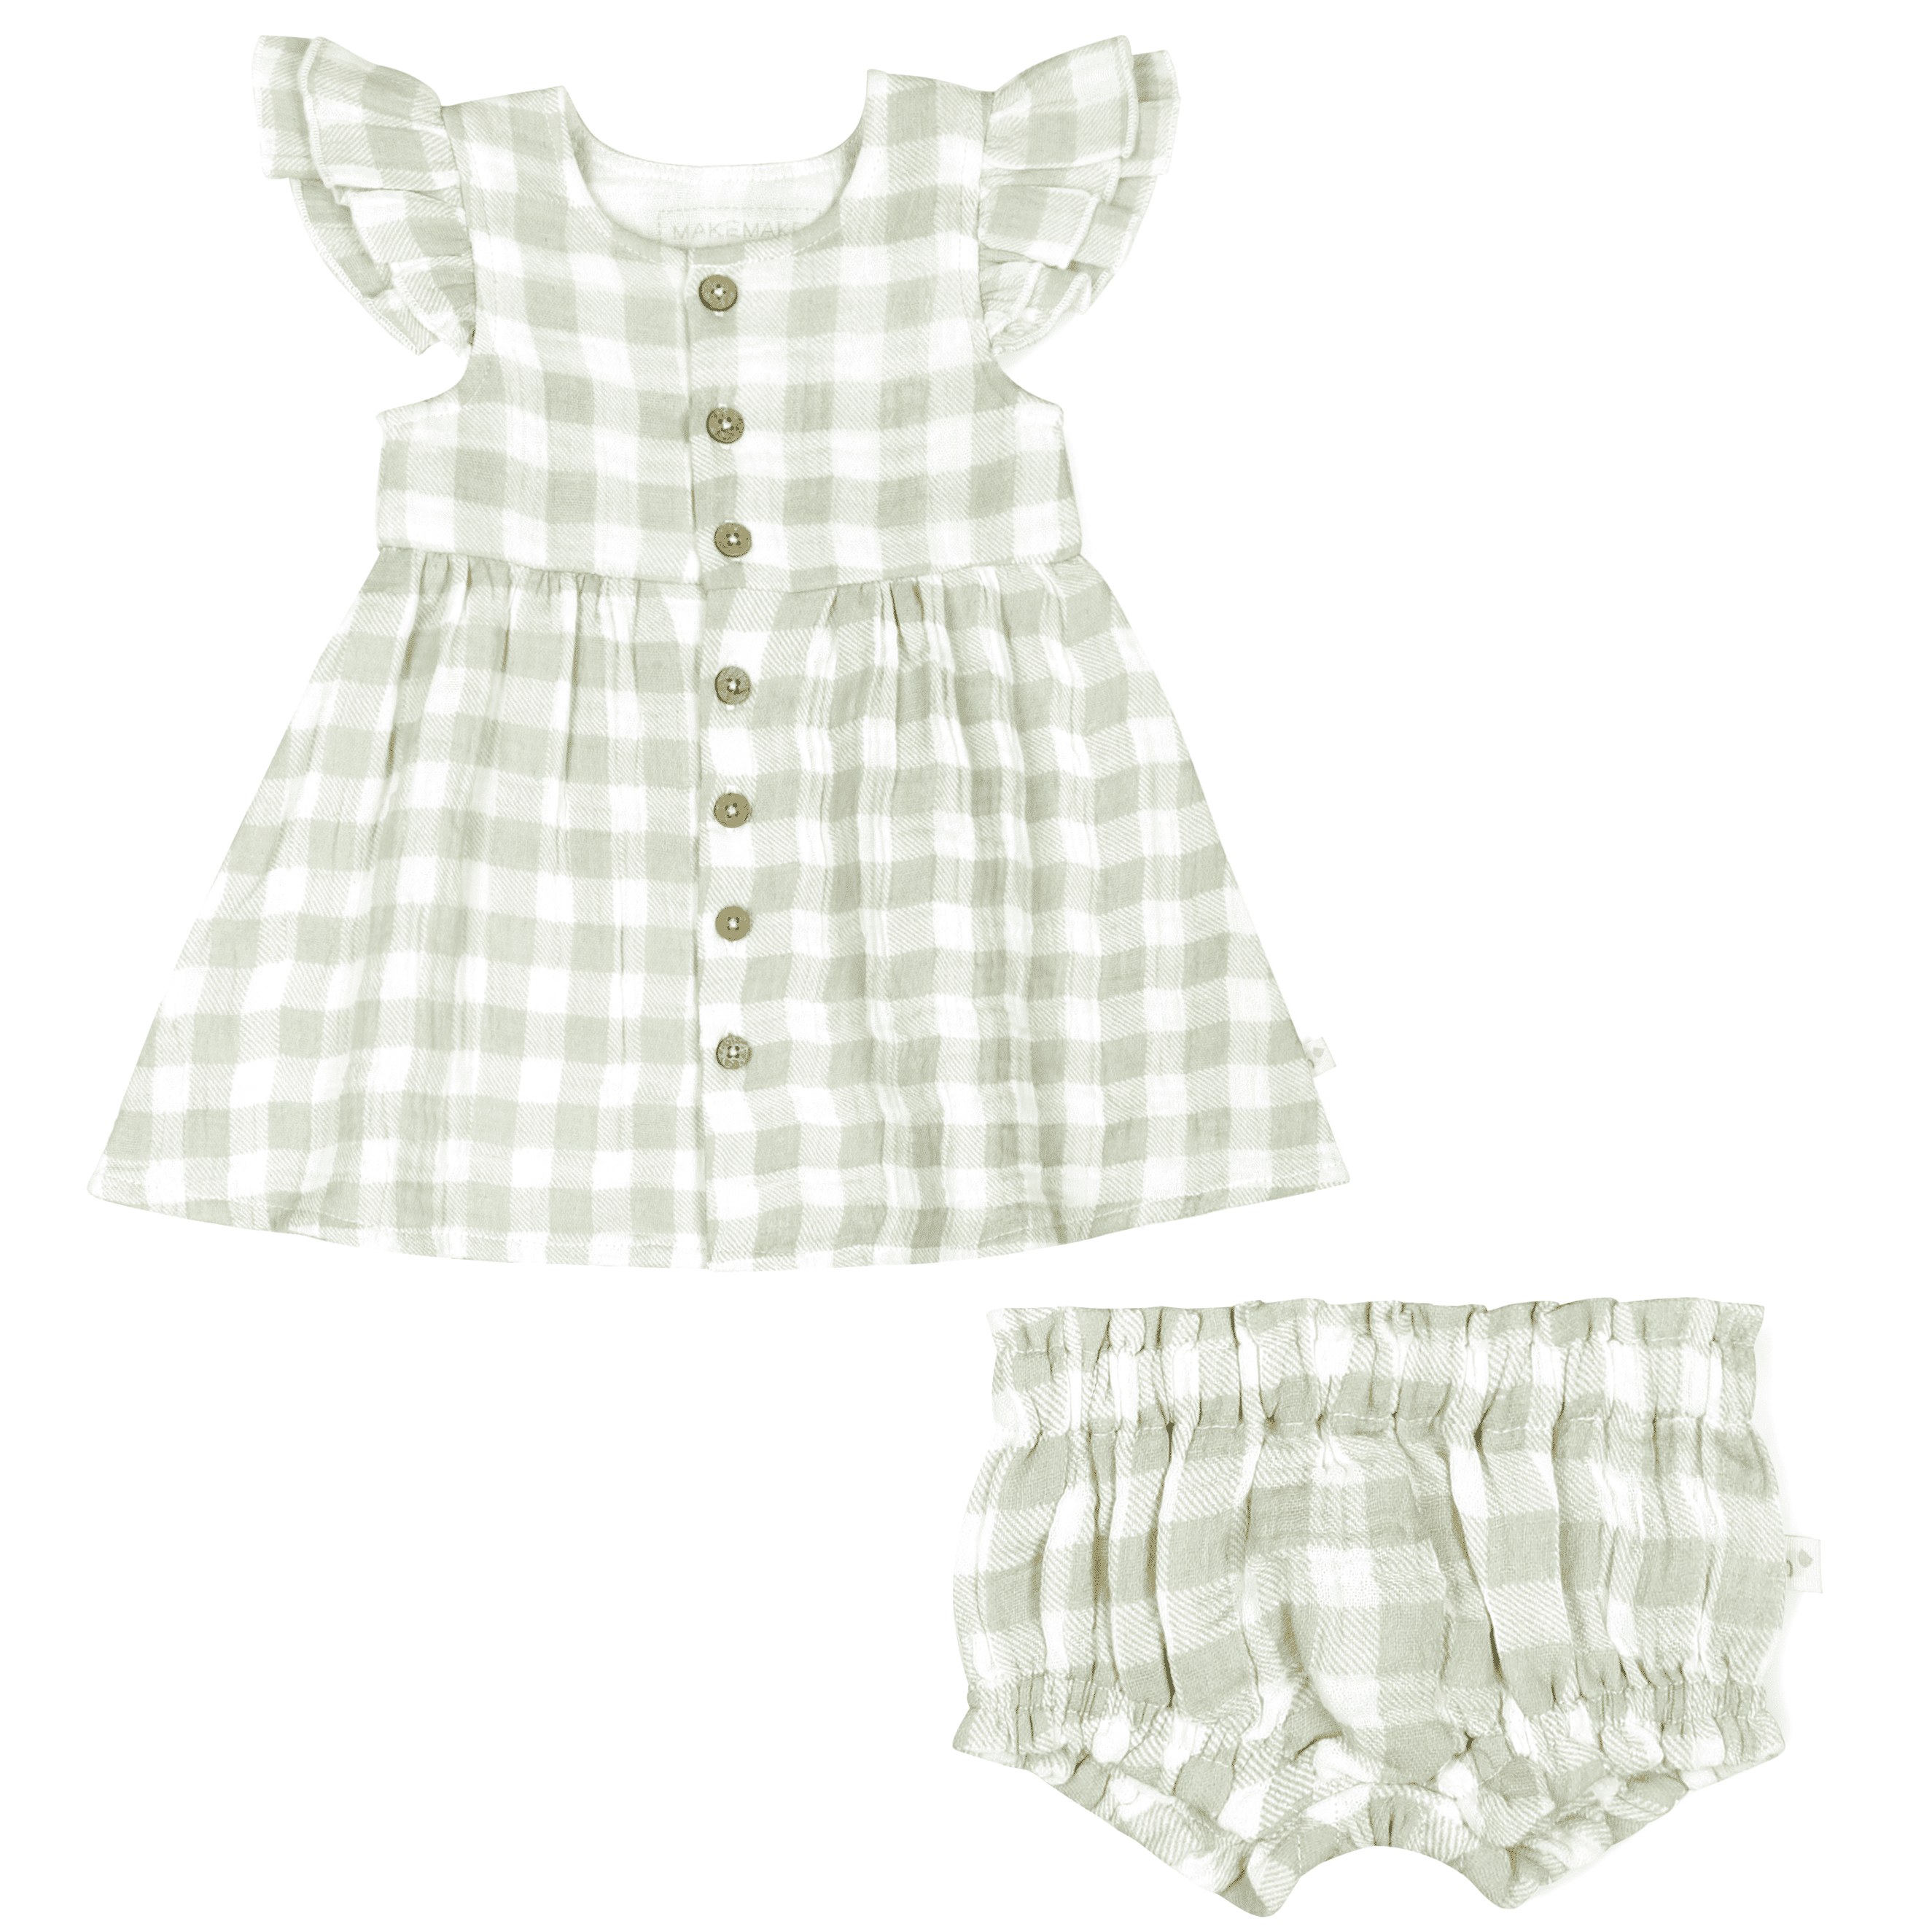 A light green and white Makemake Organics Organic Muslin Button Flutter Dress - Gingham with ruffled sleeves and buttons down the front, paired with matching bloomers for a toddler girl, set against a white background.